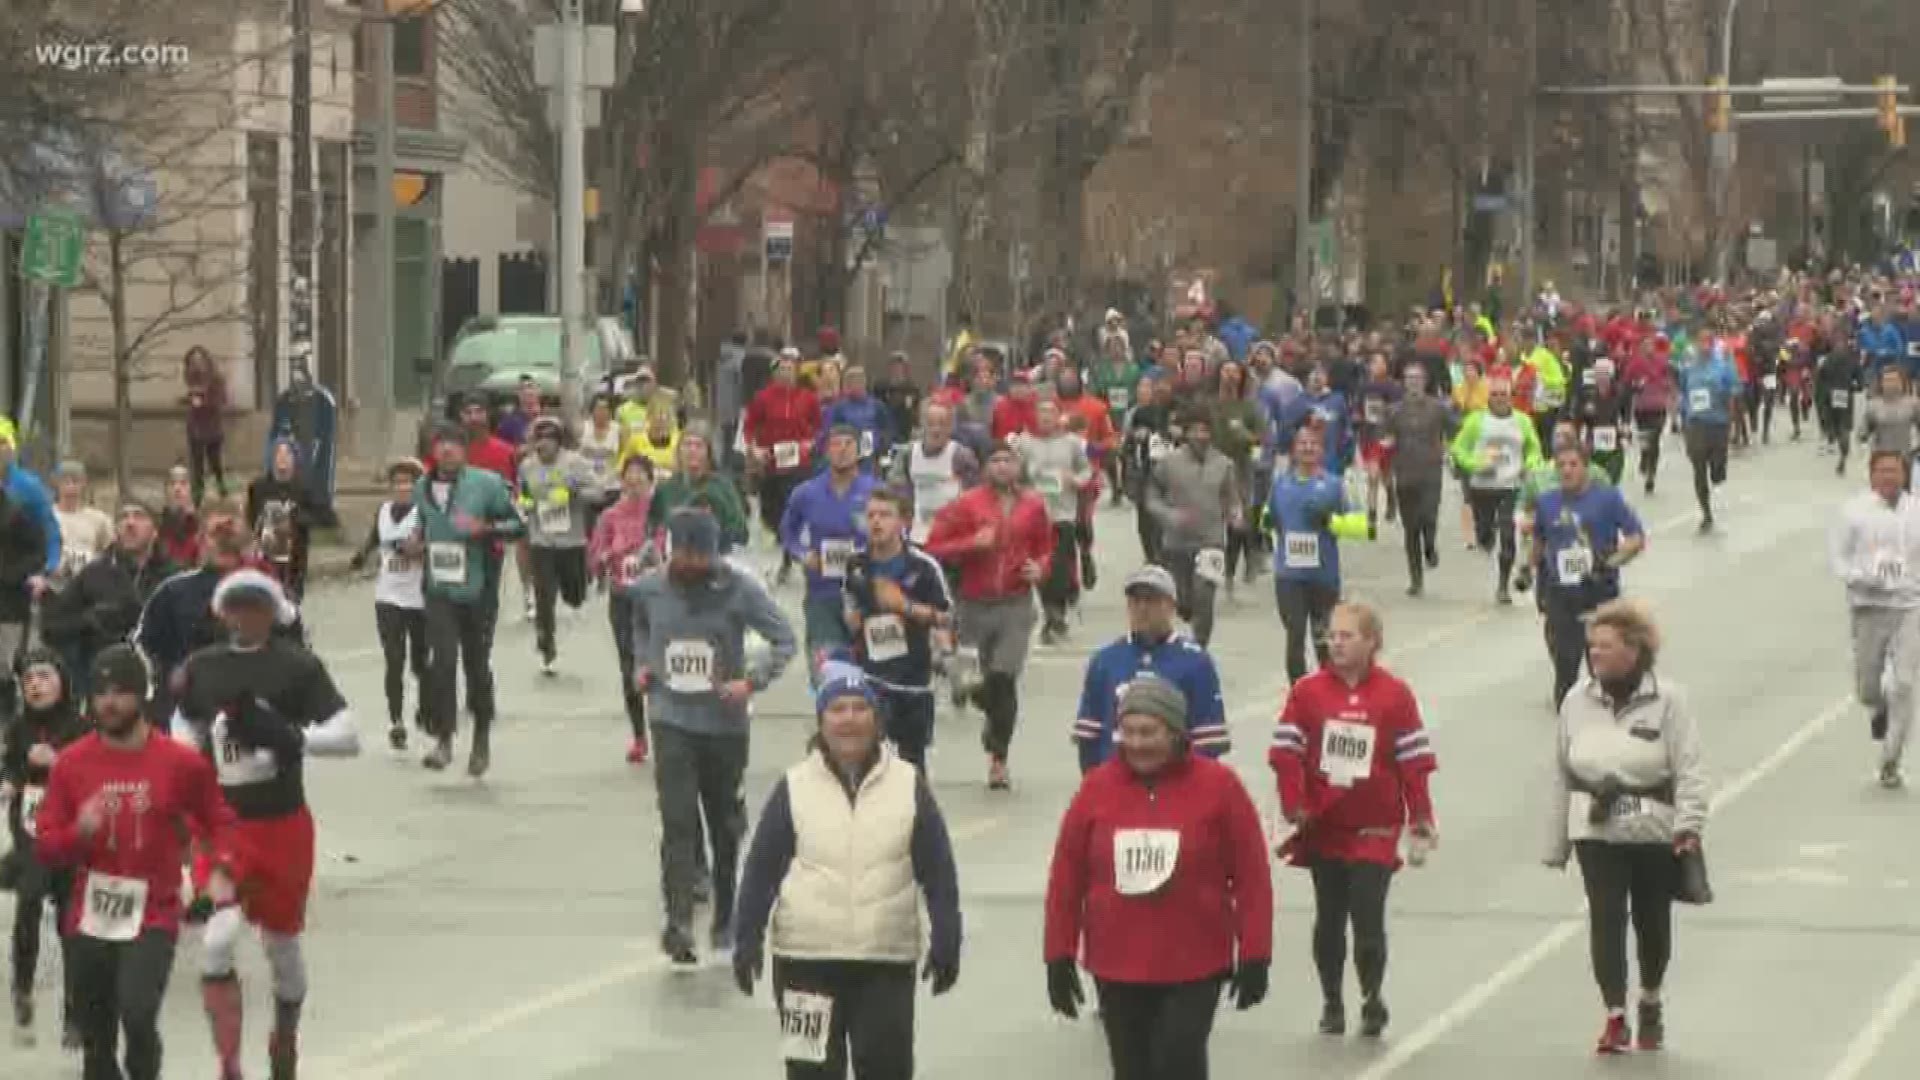 124th Annual YMCA Turkey Trot in Buffalo, NY.  Missed the race?  Check it out here!